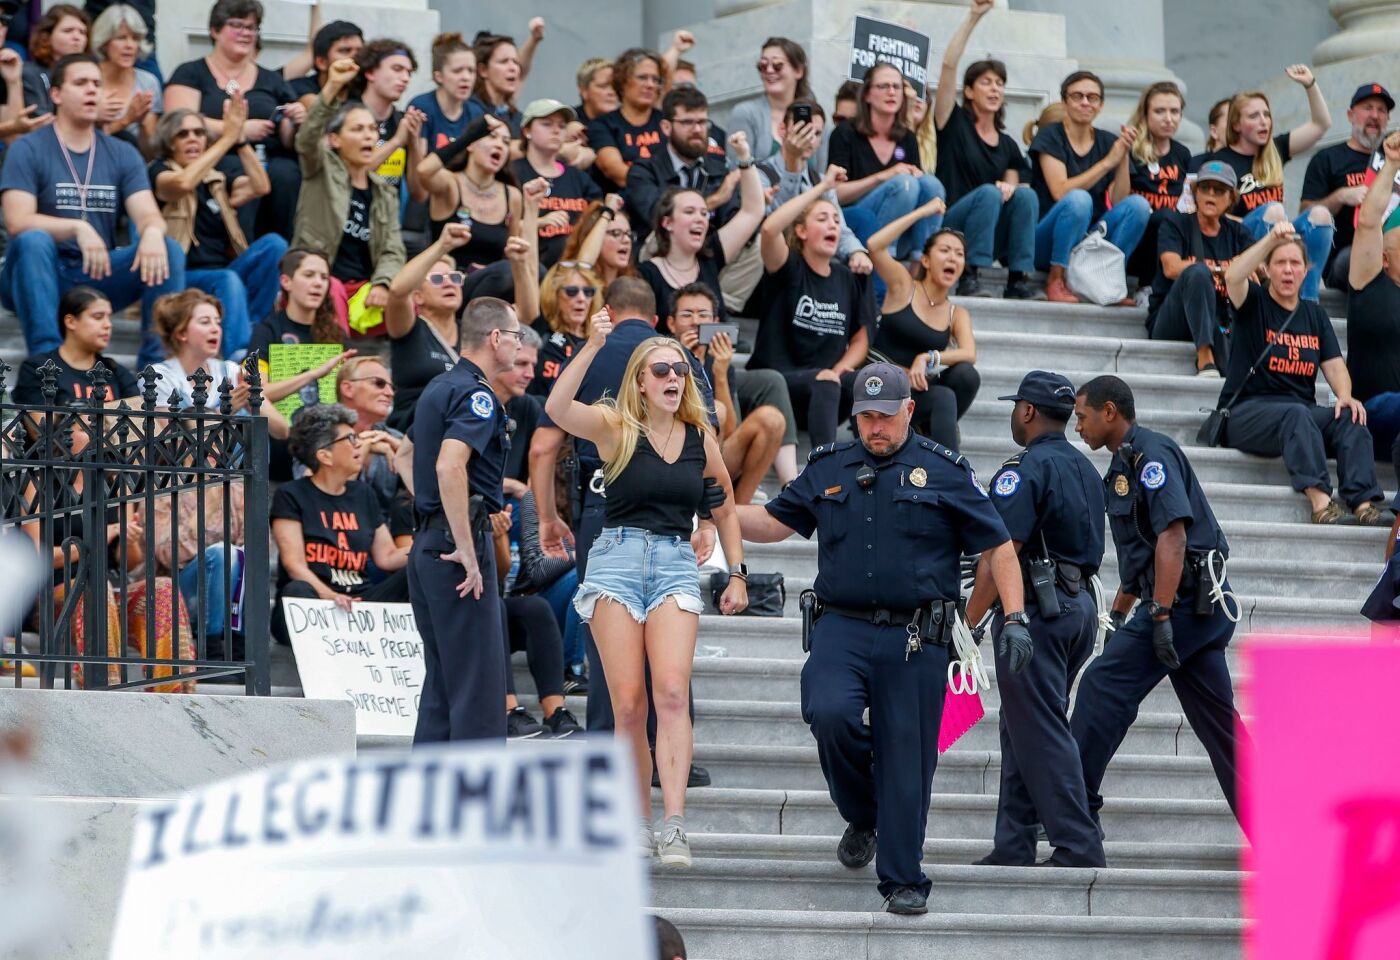 Police detain protesters who occupied the East Front steps of the U.S. Capitol before the Senate voted on the confirmation of Brett Kavanaugh.